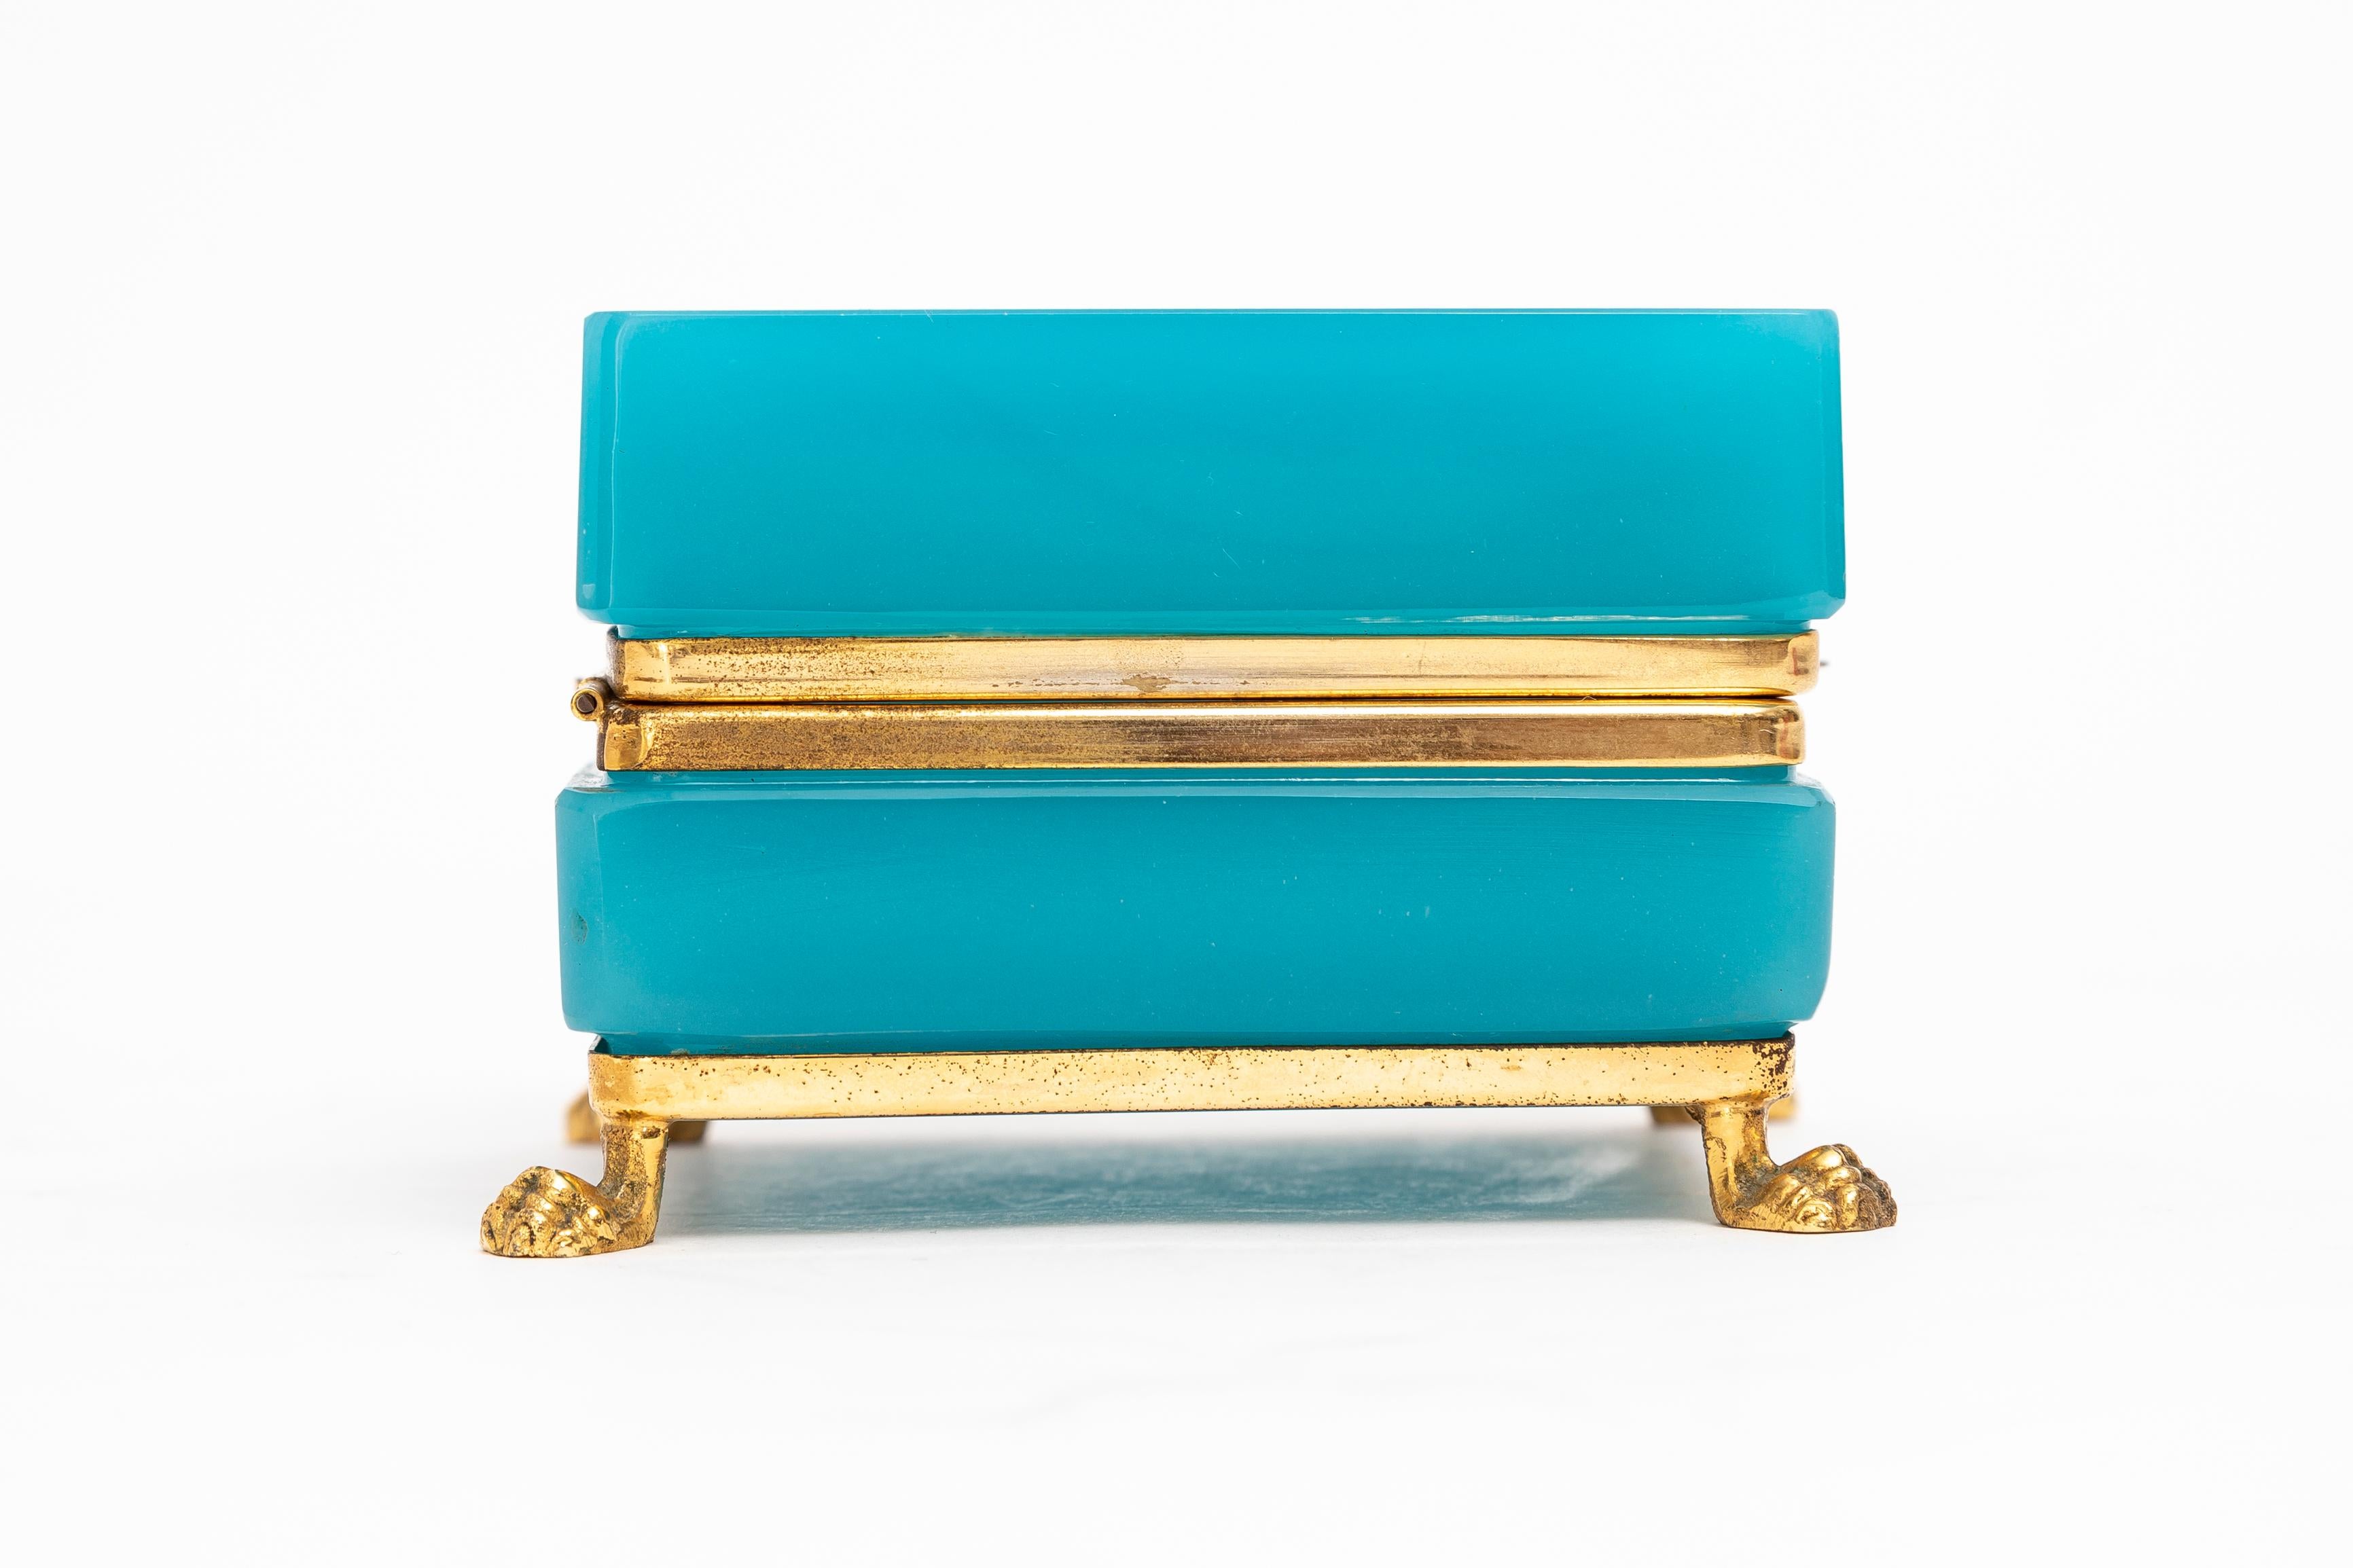 Polished French Mid-Century Mod. Blue Opaline & Dore Bronze Footed Jewel-Box/Tea-Caddy For Sale